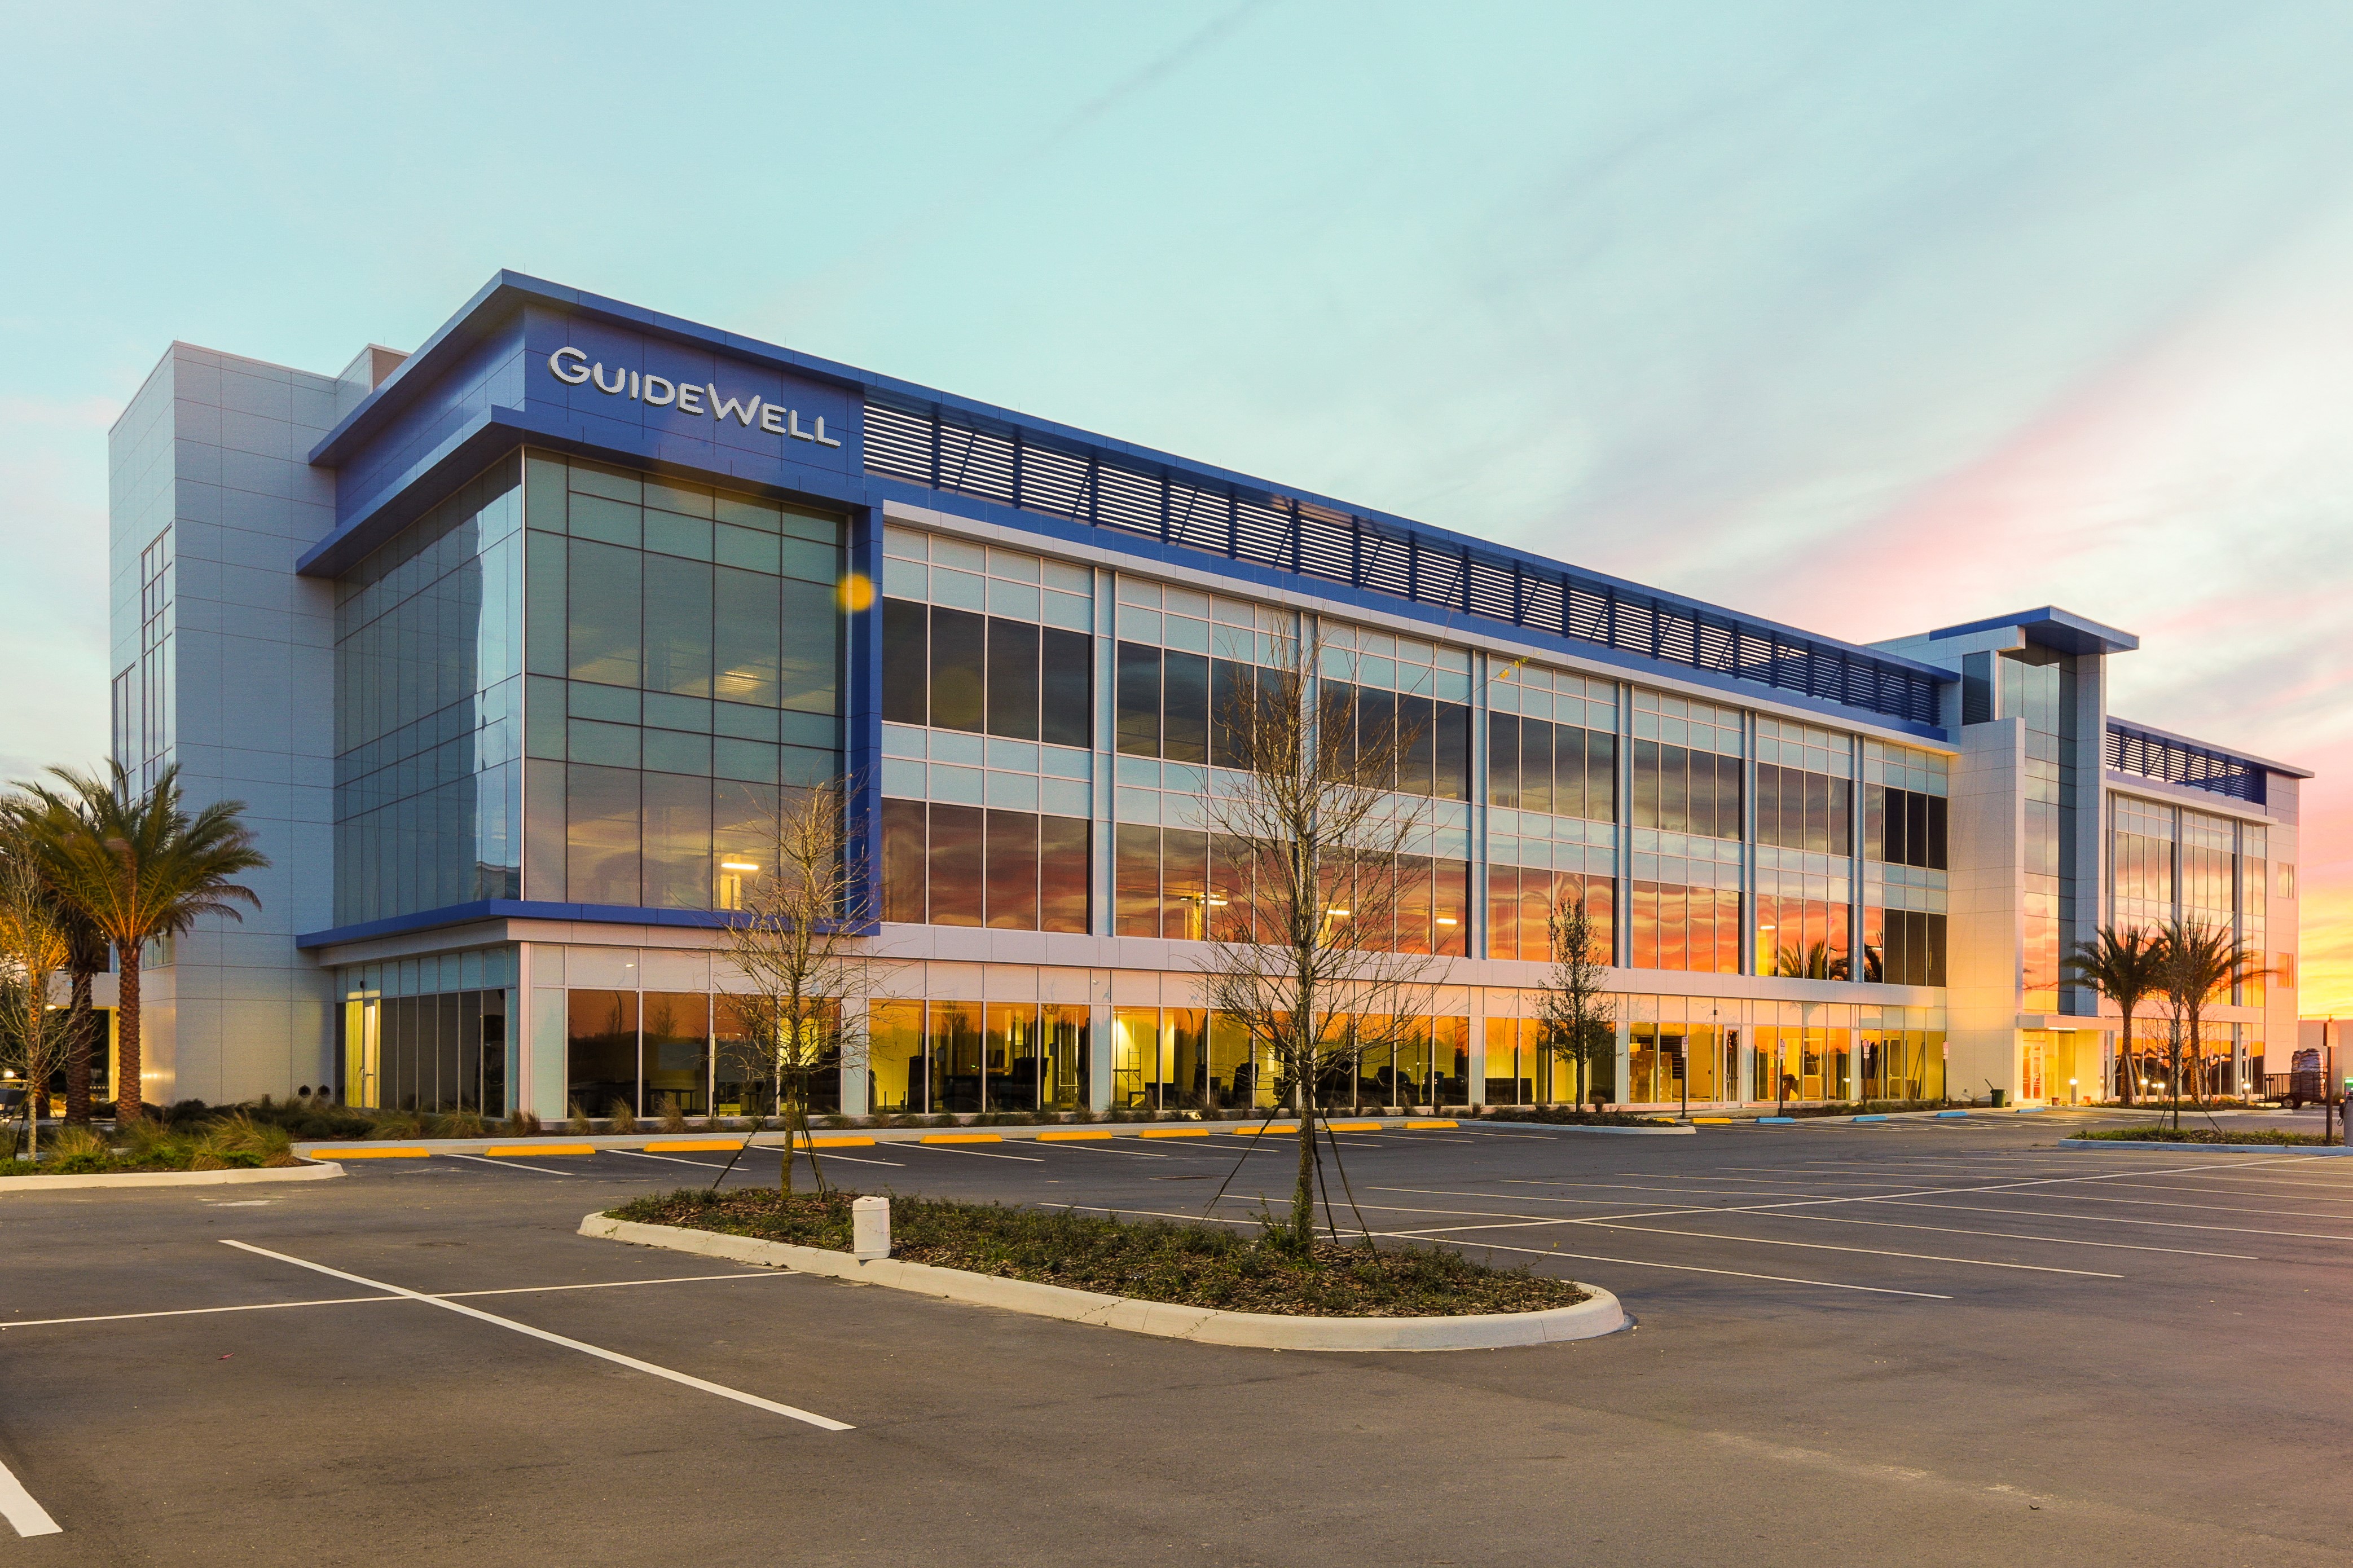 PT Genie opens its new headquarters in the GuideWell Innovation Center in Orlando's Lake Nona Medical City.